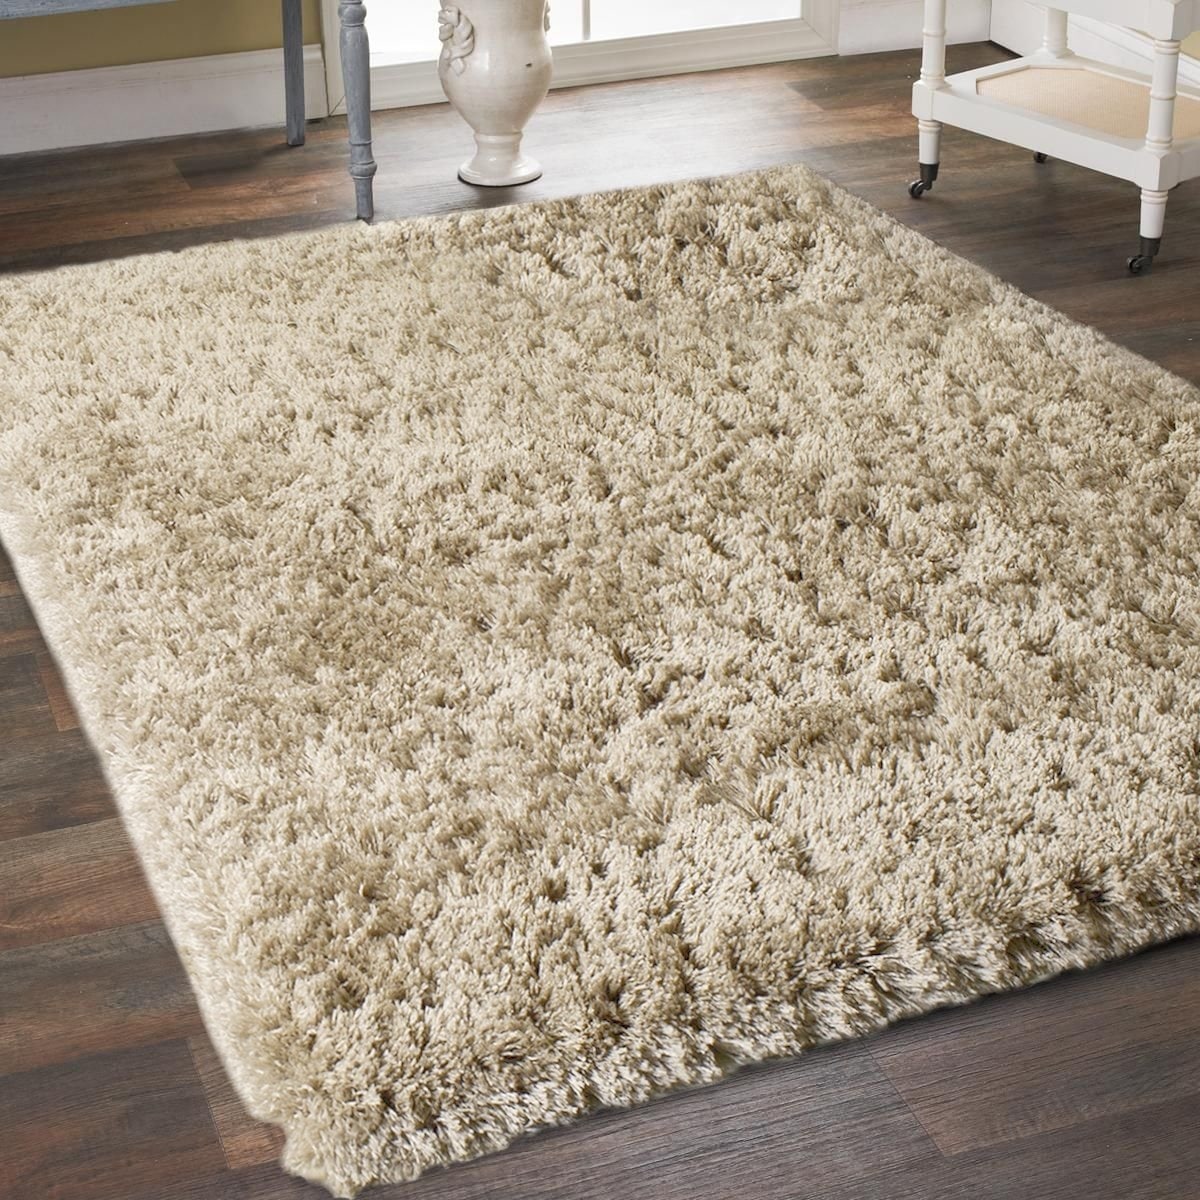 AMAZING SOFT & THICK RUG 'LOVE SHAGGY' Polyester 6cm HIGH QUALITY carpets 6sizes 